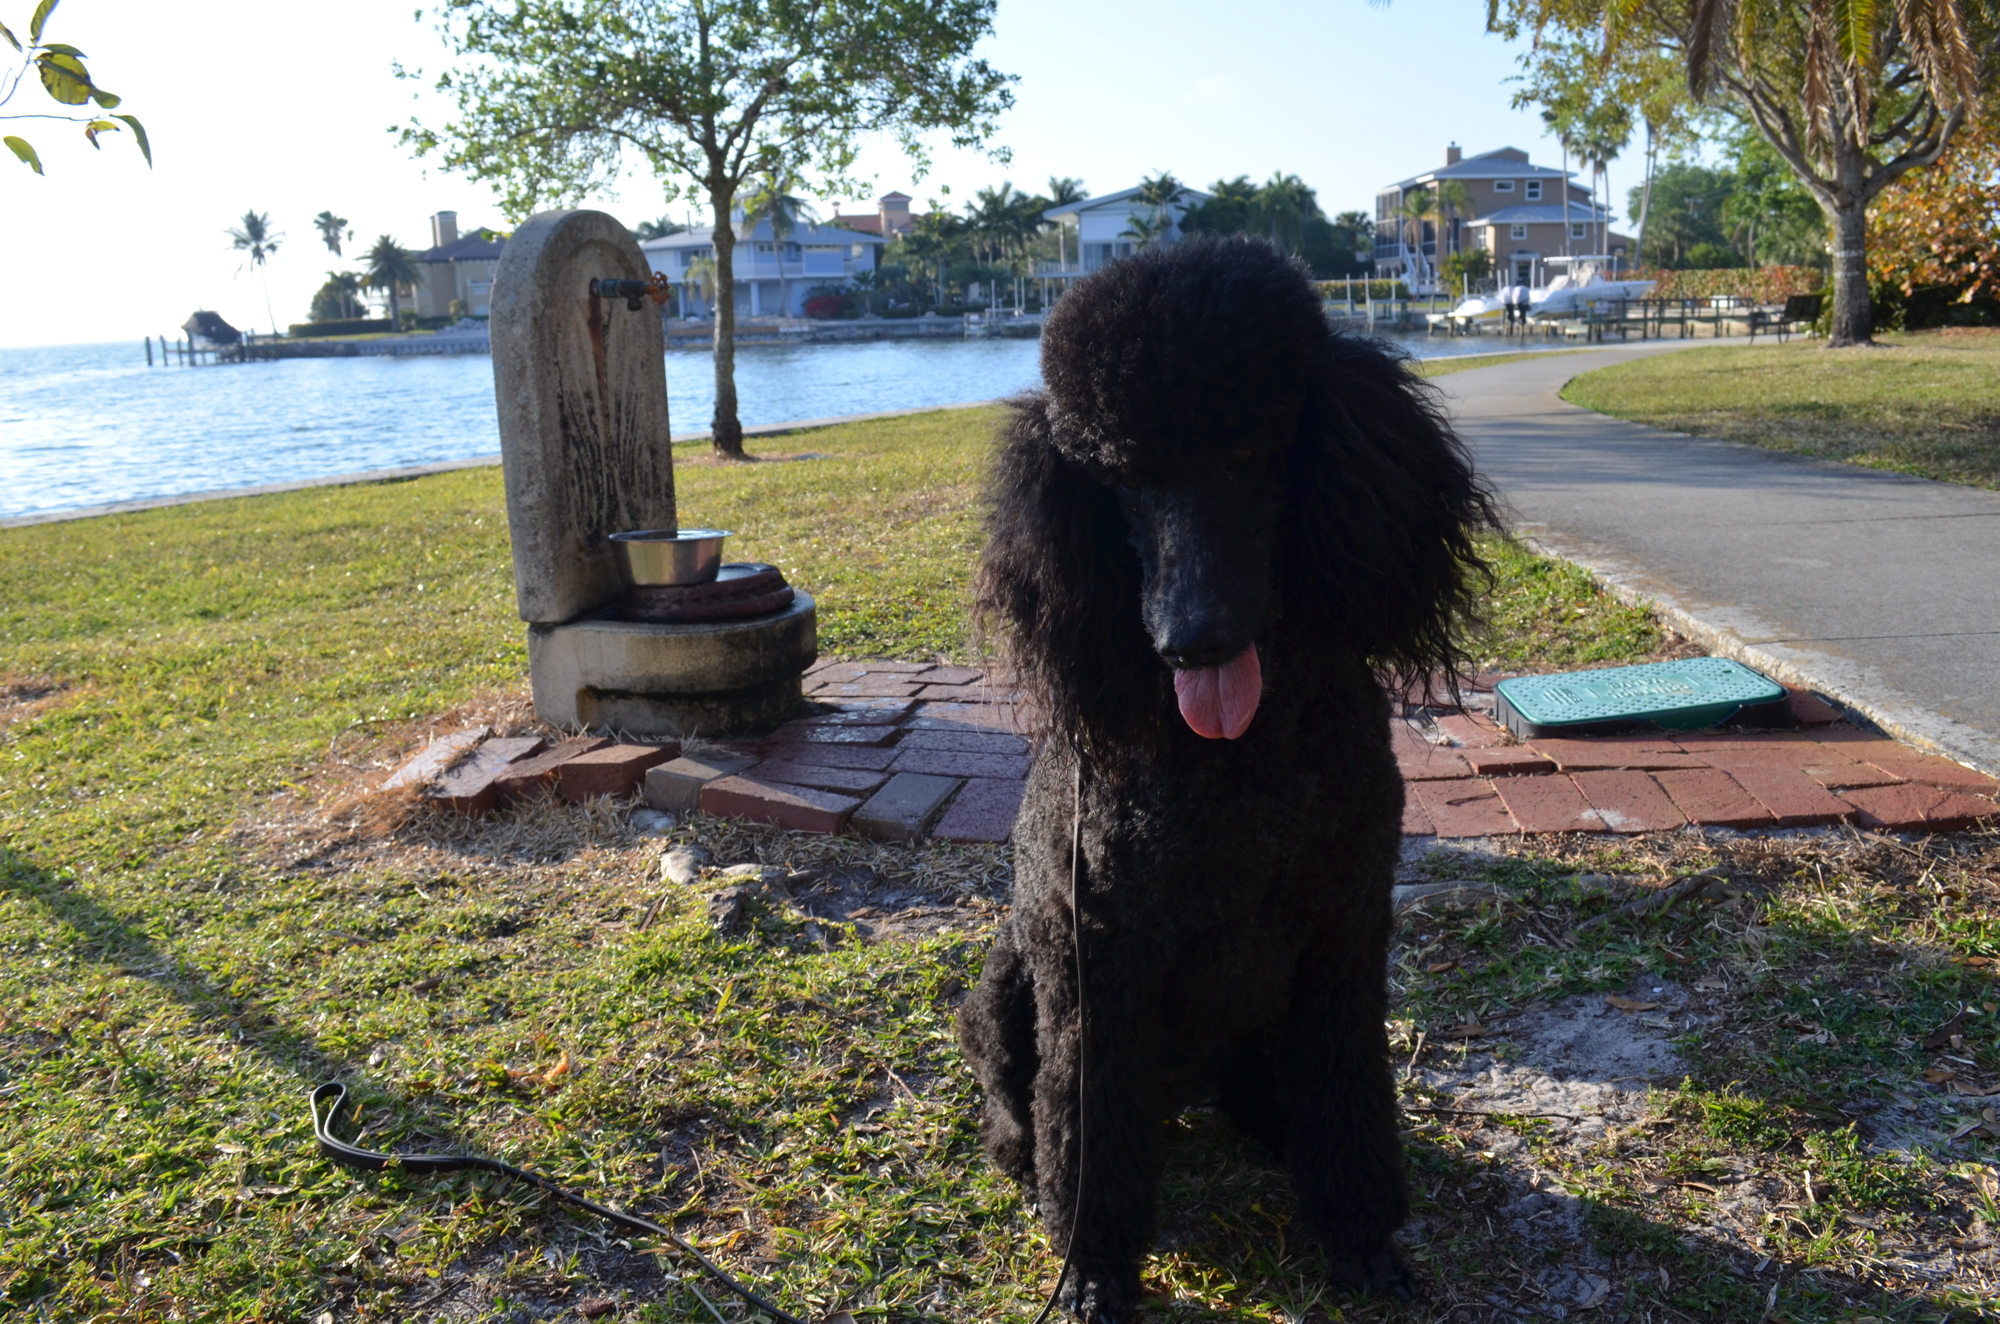 Liebchen sits in front of the Sapphire Shores Park dog bowl, one sign that the park is an important resource for neighborhood dog owners.